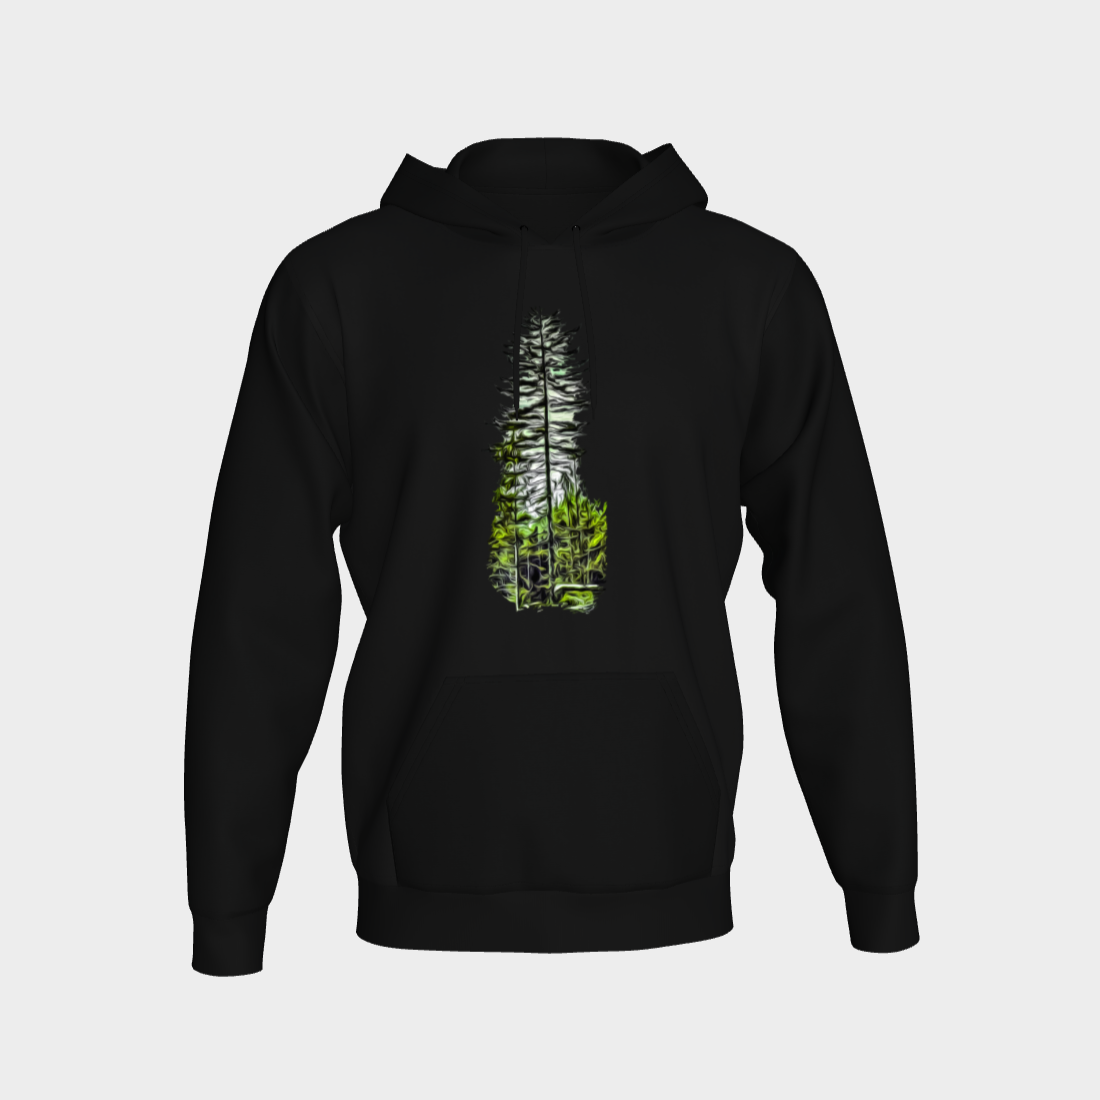 Old Growth Forest Unisex Pullover Hoodie Your Van Isle Goddess unisex pullover hoodie is a great classic hoodie!  Created with state of the art tri-tex material which is a non-shrink poly middle encased in two layers of ultra soft cotton face and lining.